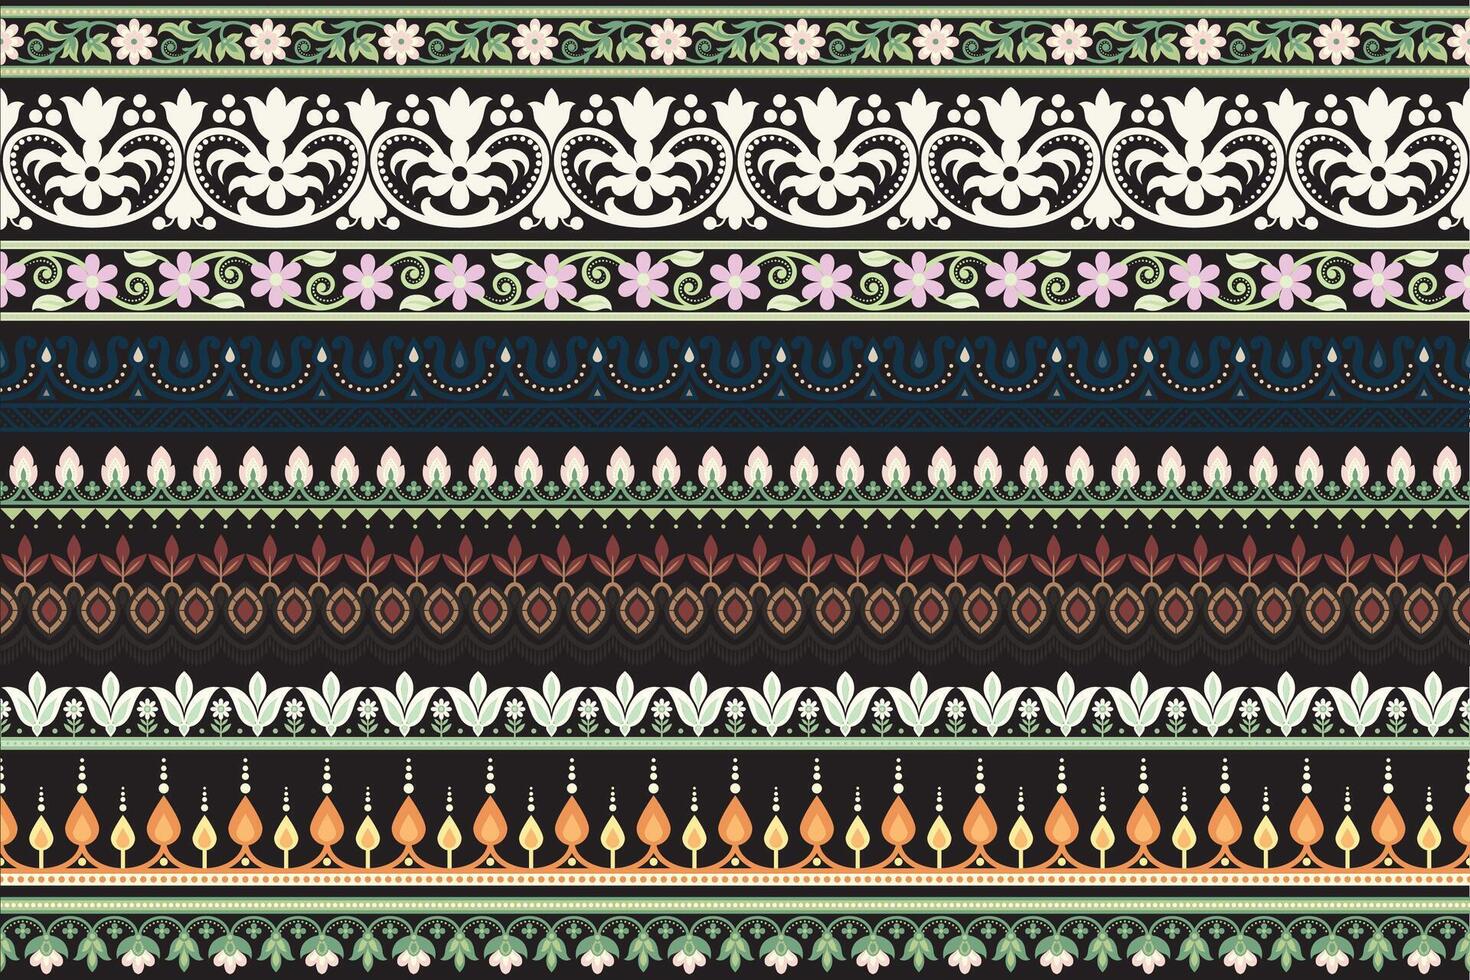 Set lace floral design elements floral seamless background. pattern geometric ethnic lace pattern design floral embroidery for textile fabric printing wallpaper carpet. Embroidery neck vector